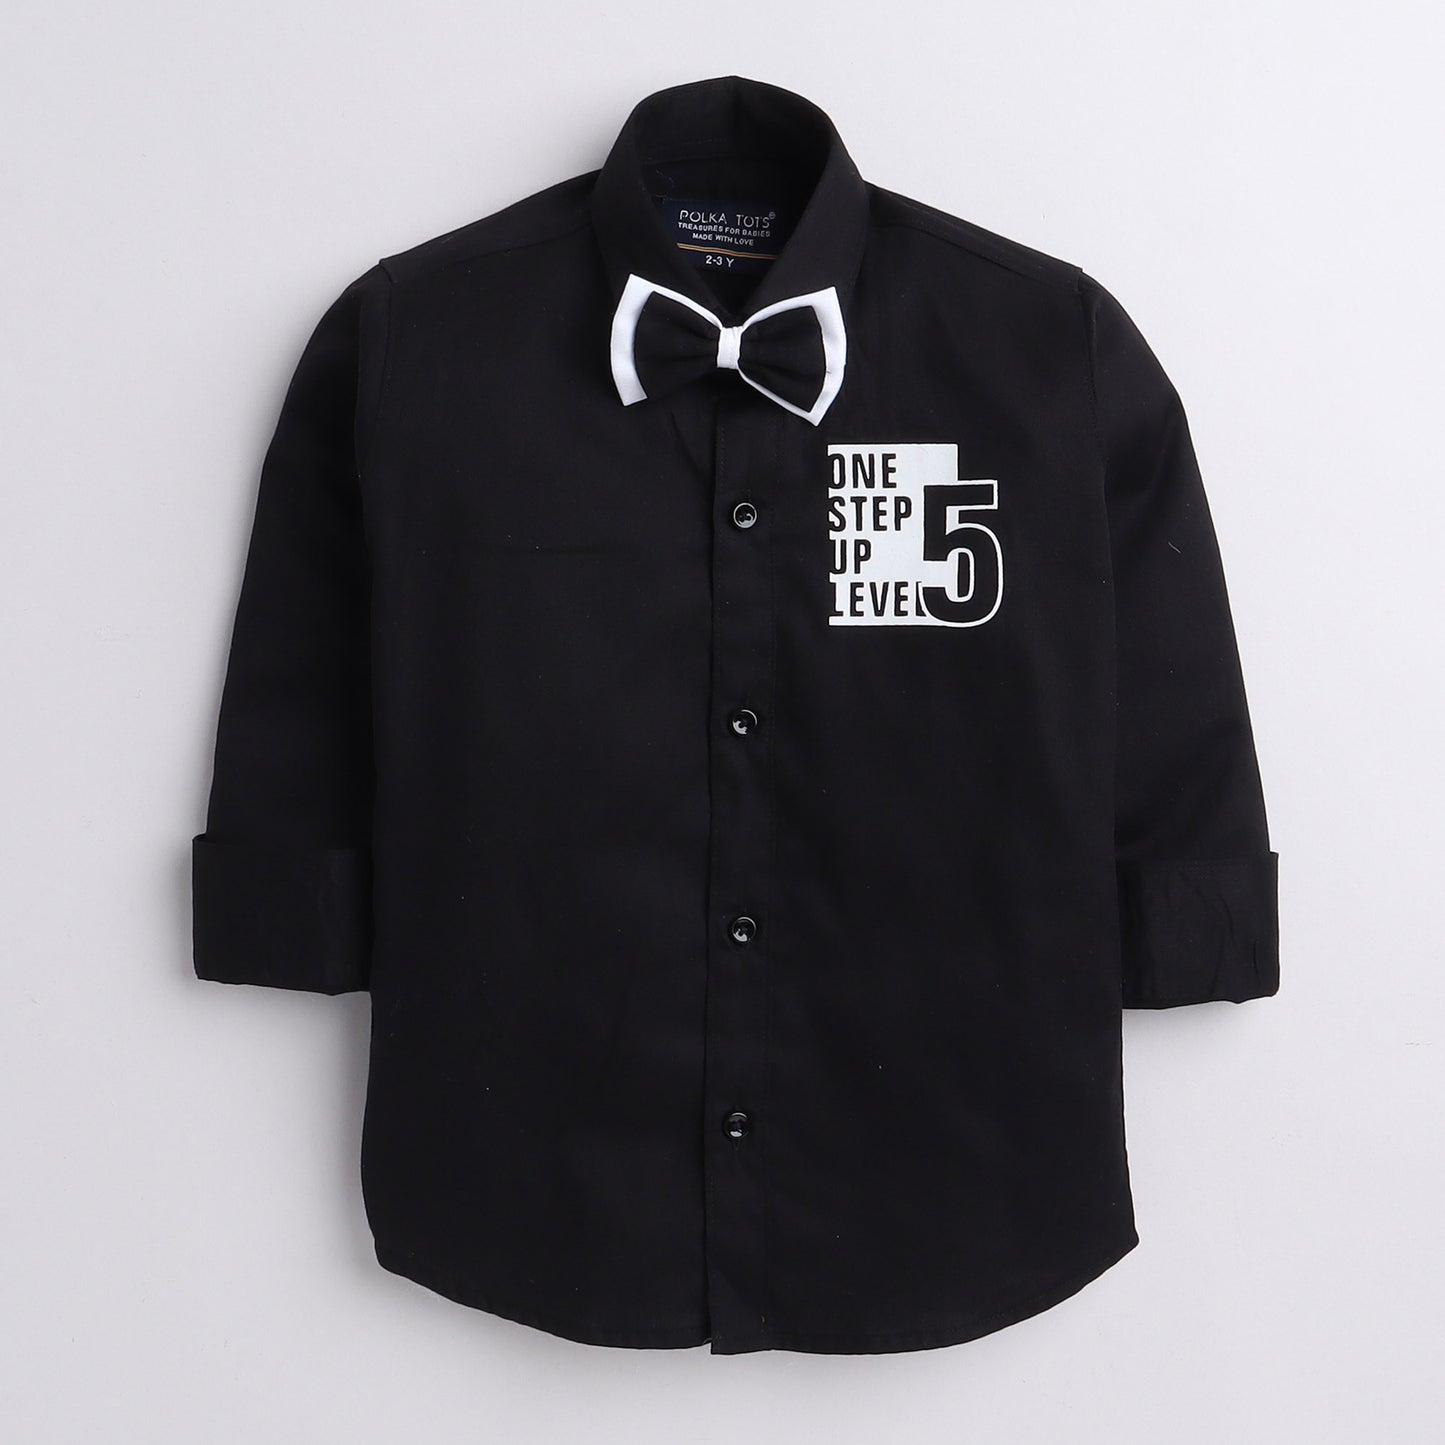  Polka Tots one step five design full sleeve shirt with bow tie - Black